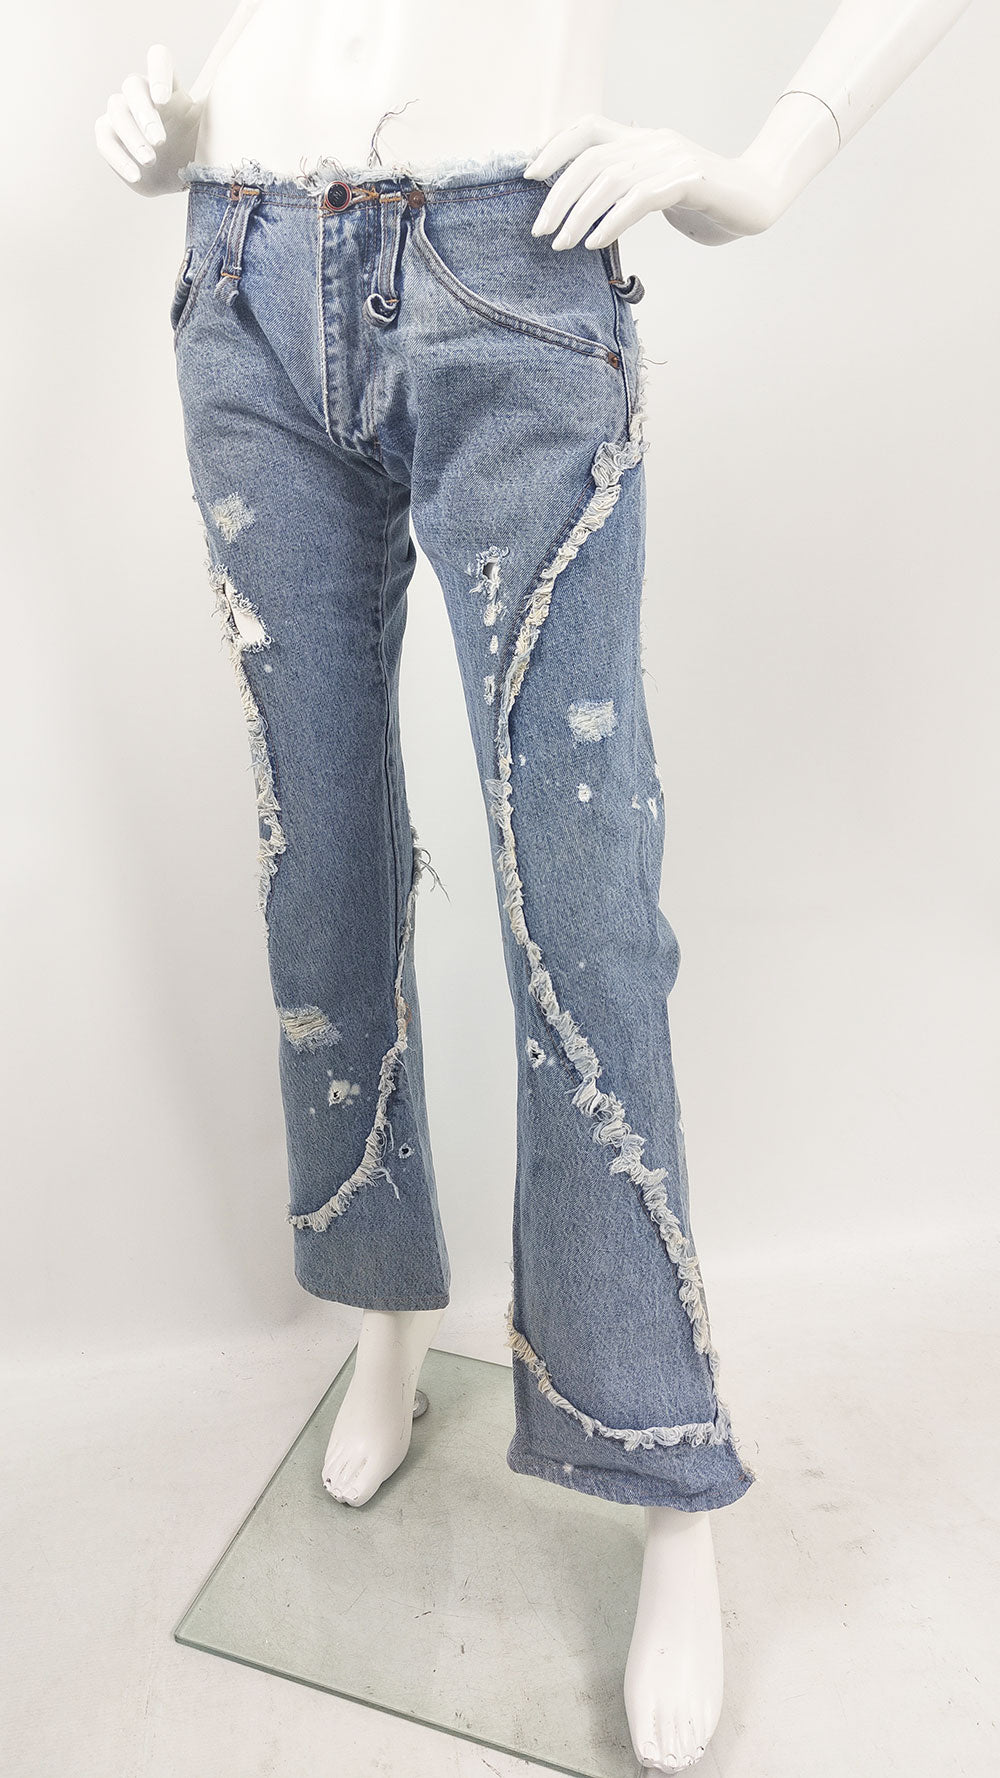 Blue vintage low waisted jeans from the early 2000s by British designer, Andrew Mackenzie.